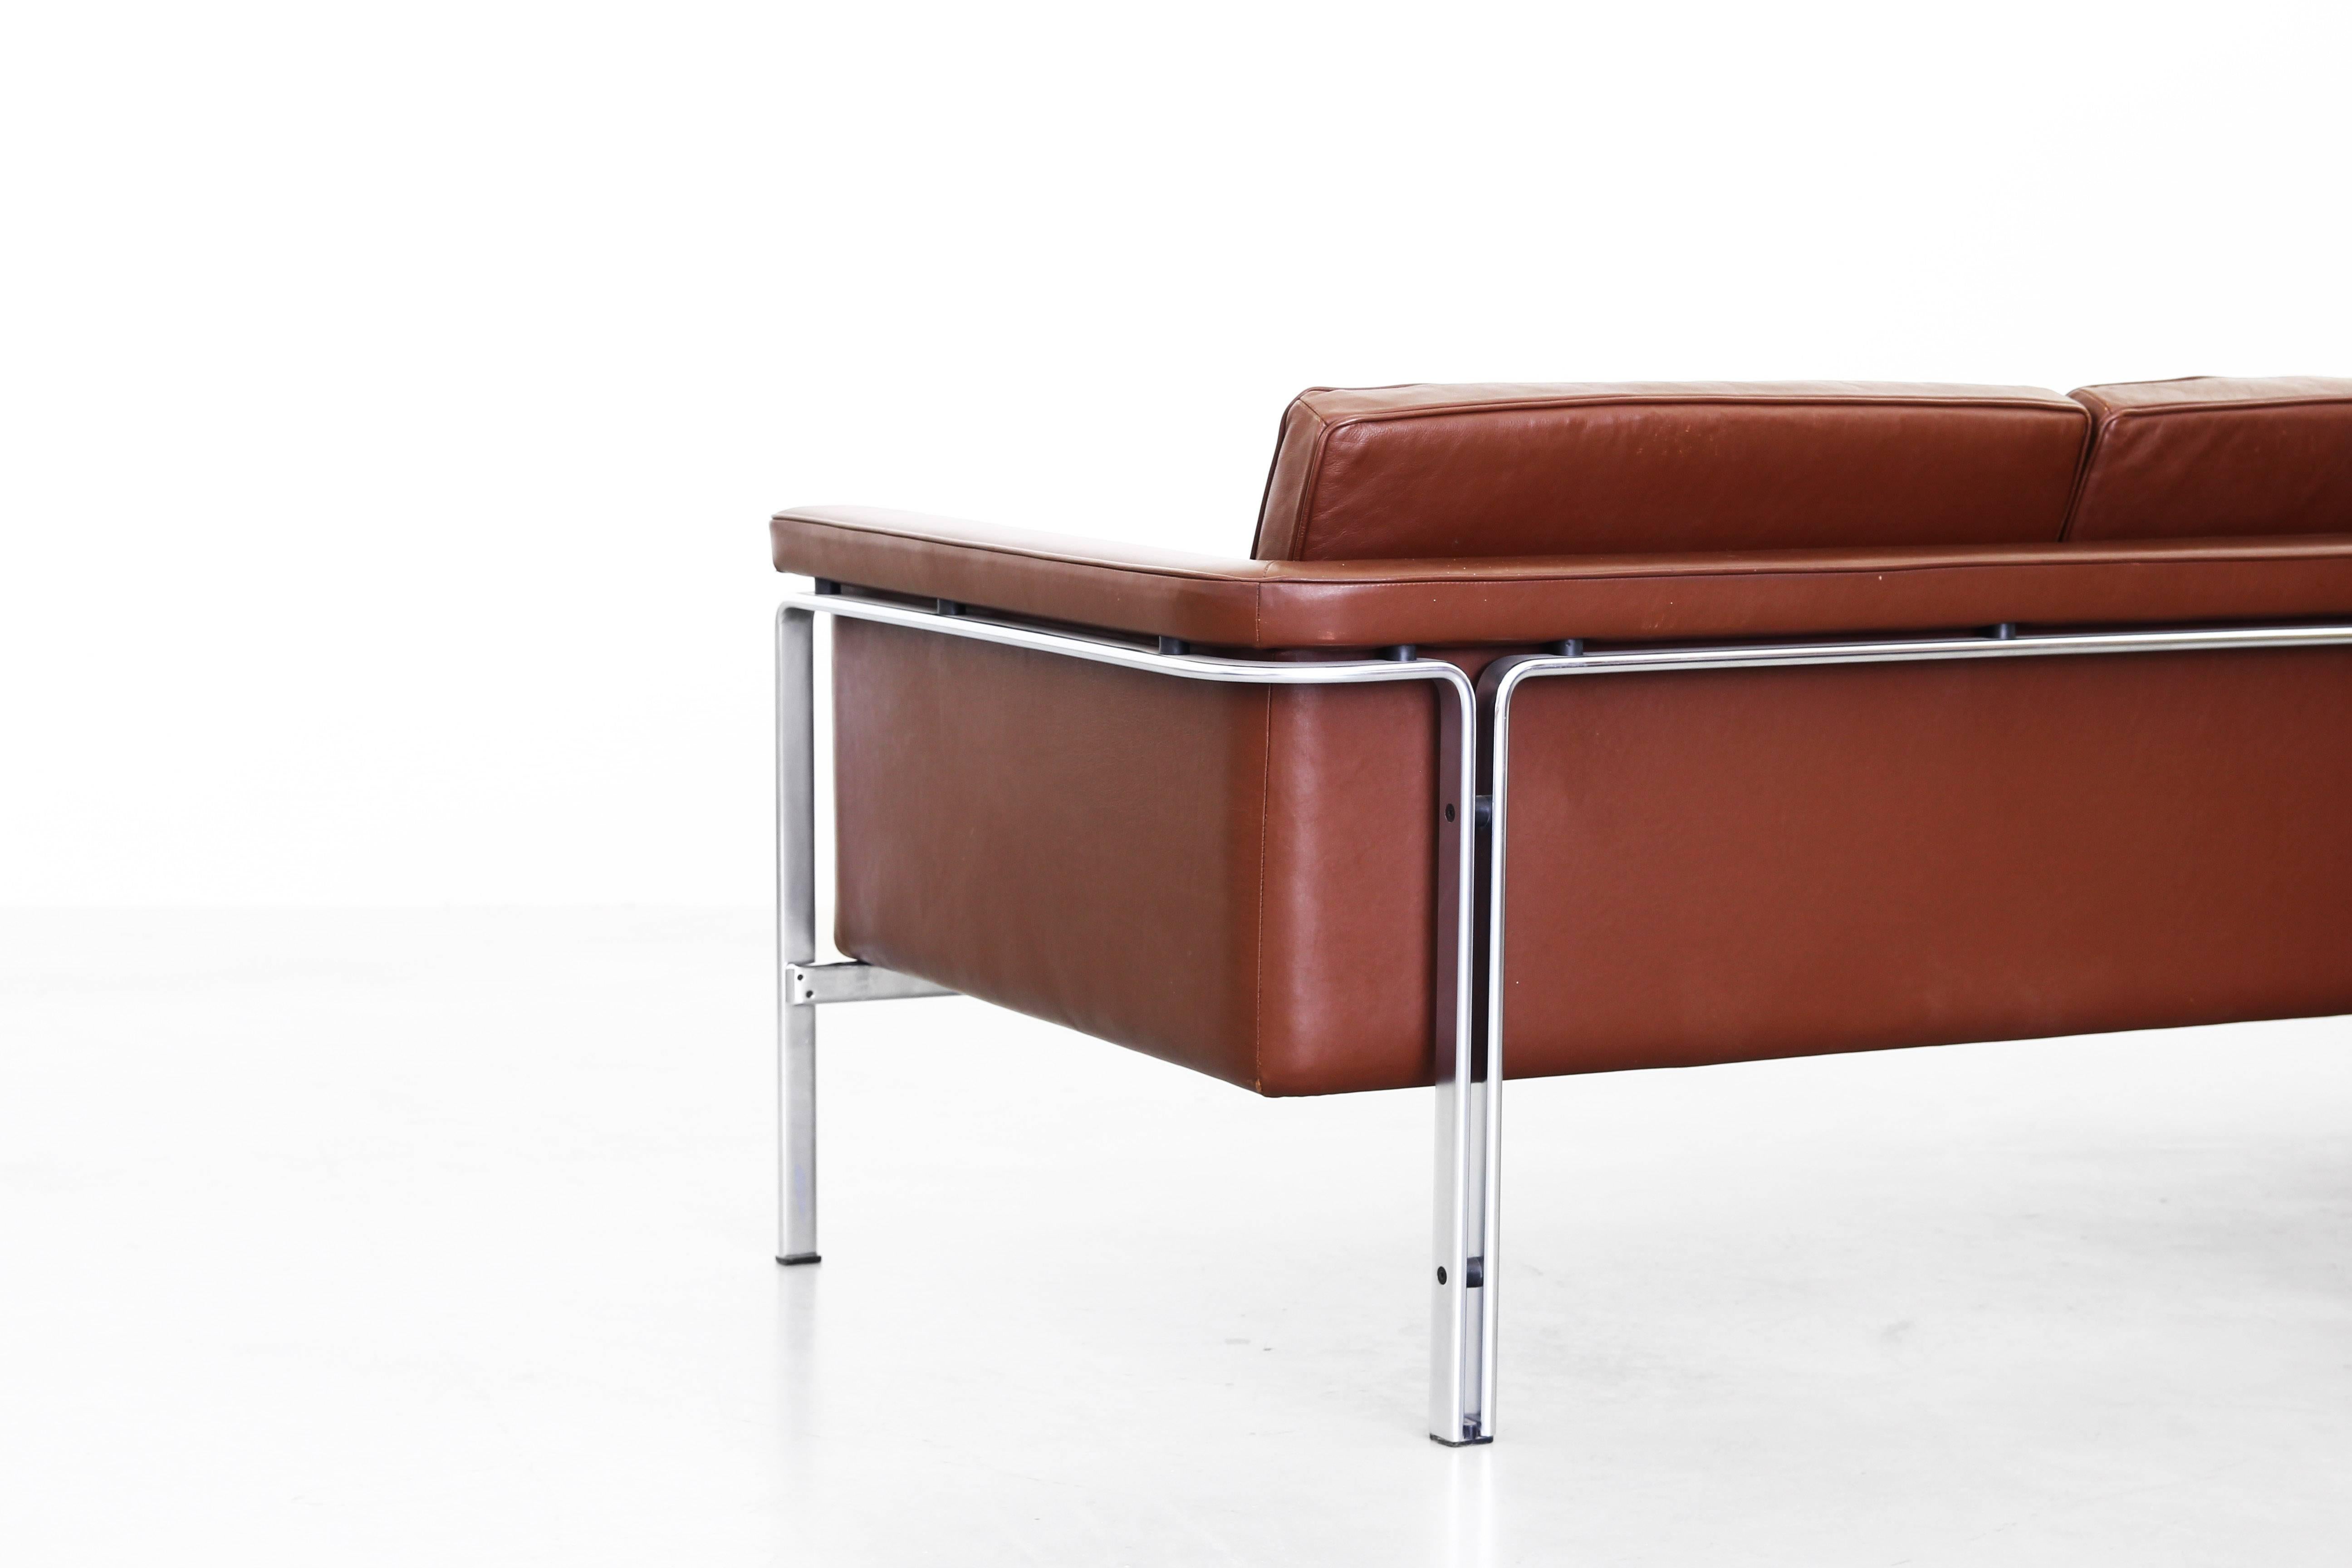 20th Century Sofa by Horst Bruning for Alfred Kill International Leather, 1968